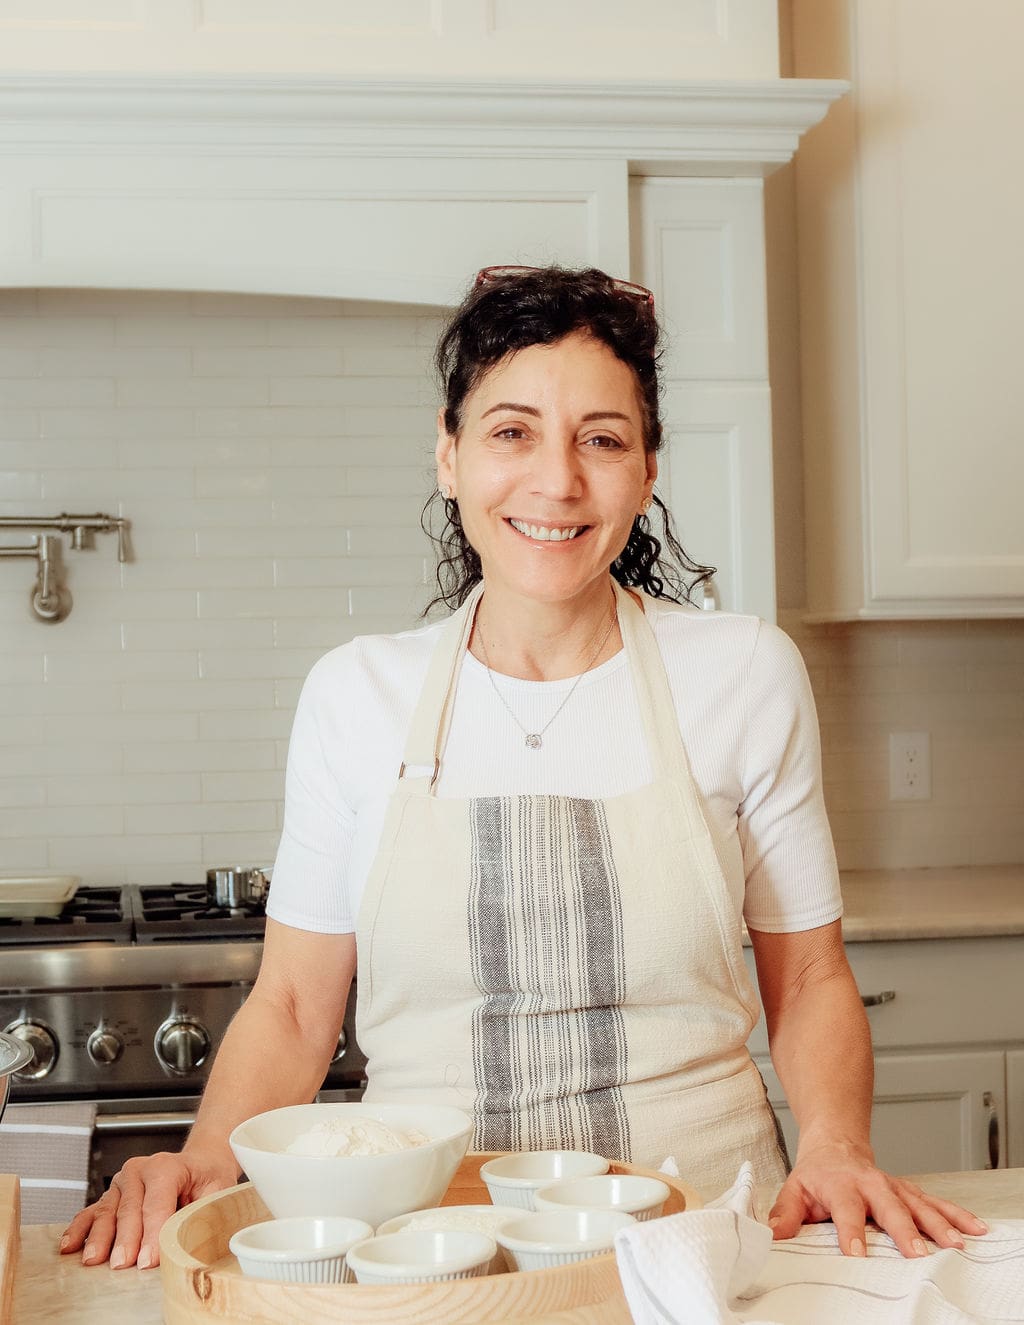 About Maria Pacillo of Boardwalk Zeppoles in New Jersey